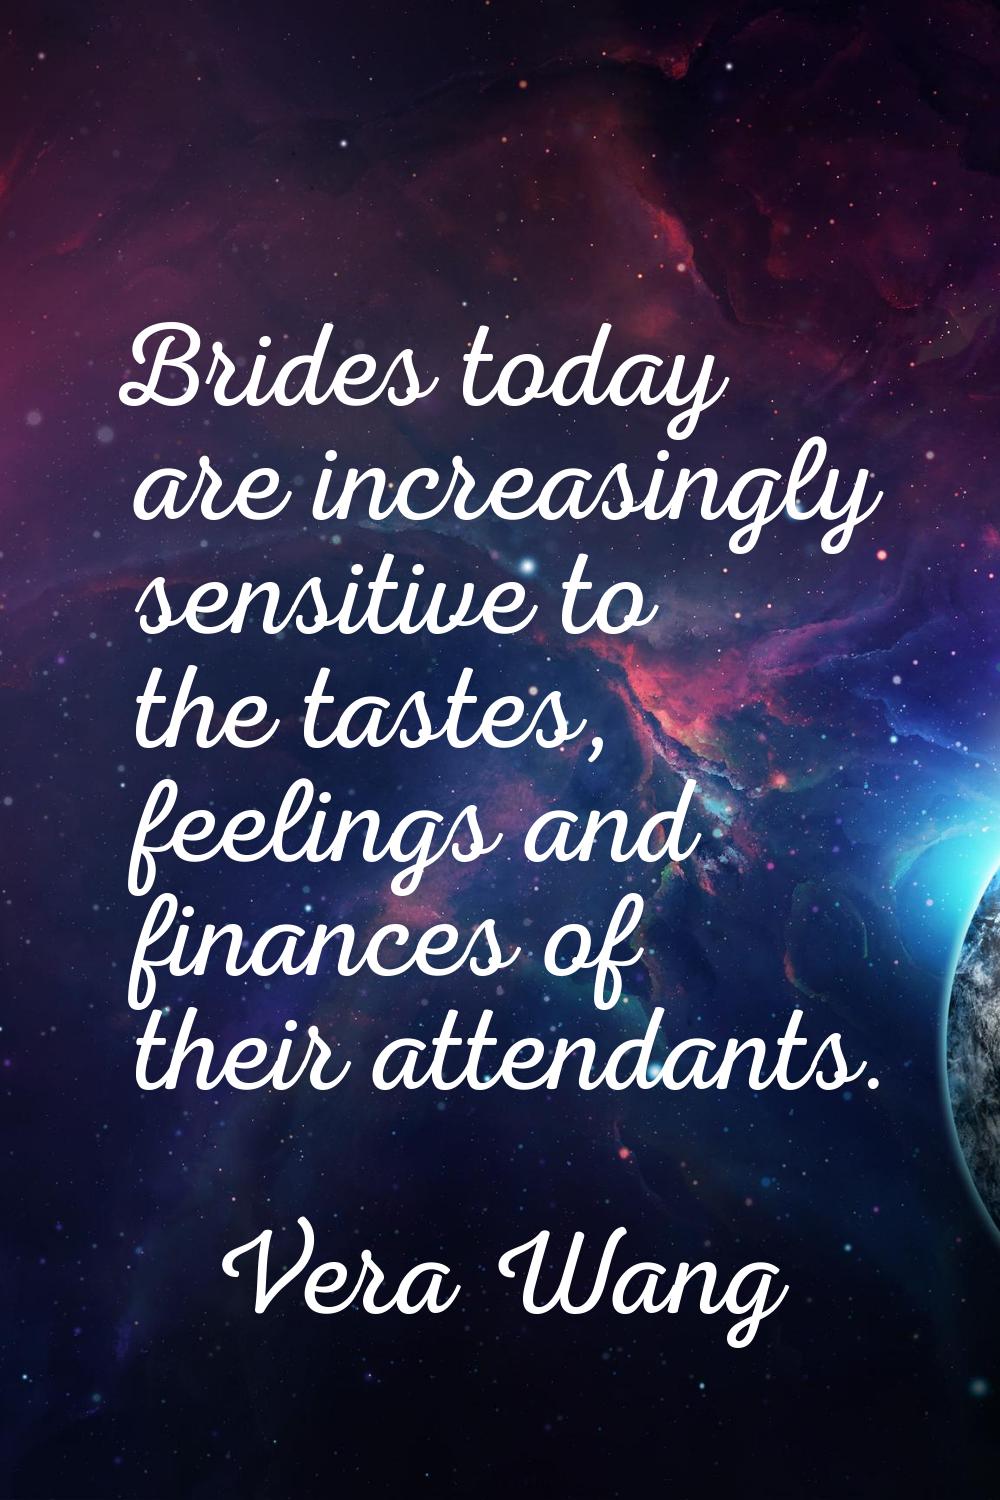 Brides today are increasingly sensitive to the tastes, feelings and finances of their attendants.